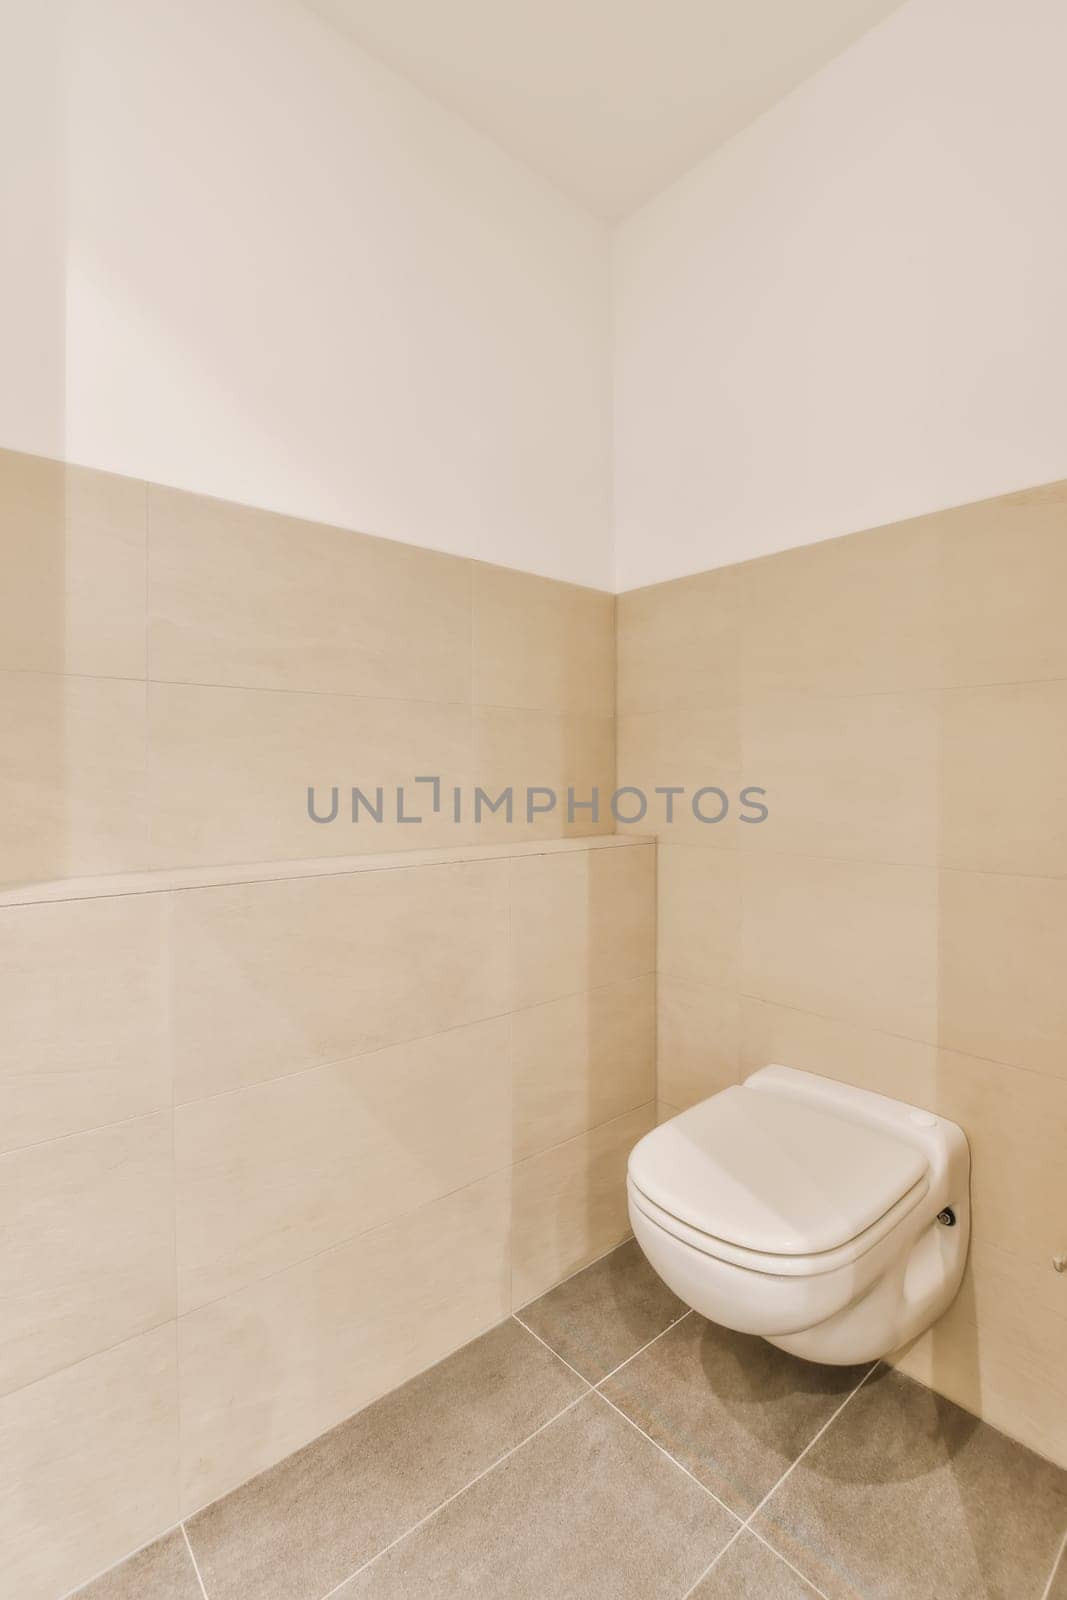 a white toilet in the corner of a bathroom with beige tiles on the floor and walls, there is no one